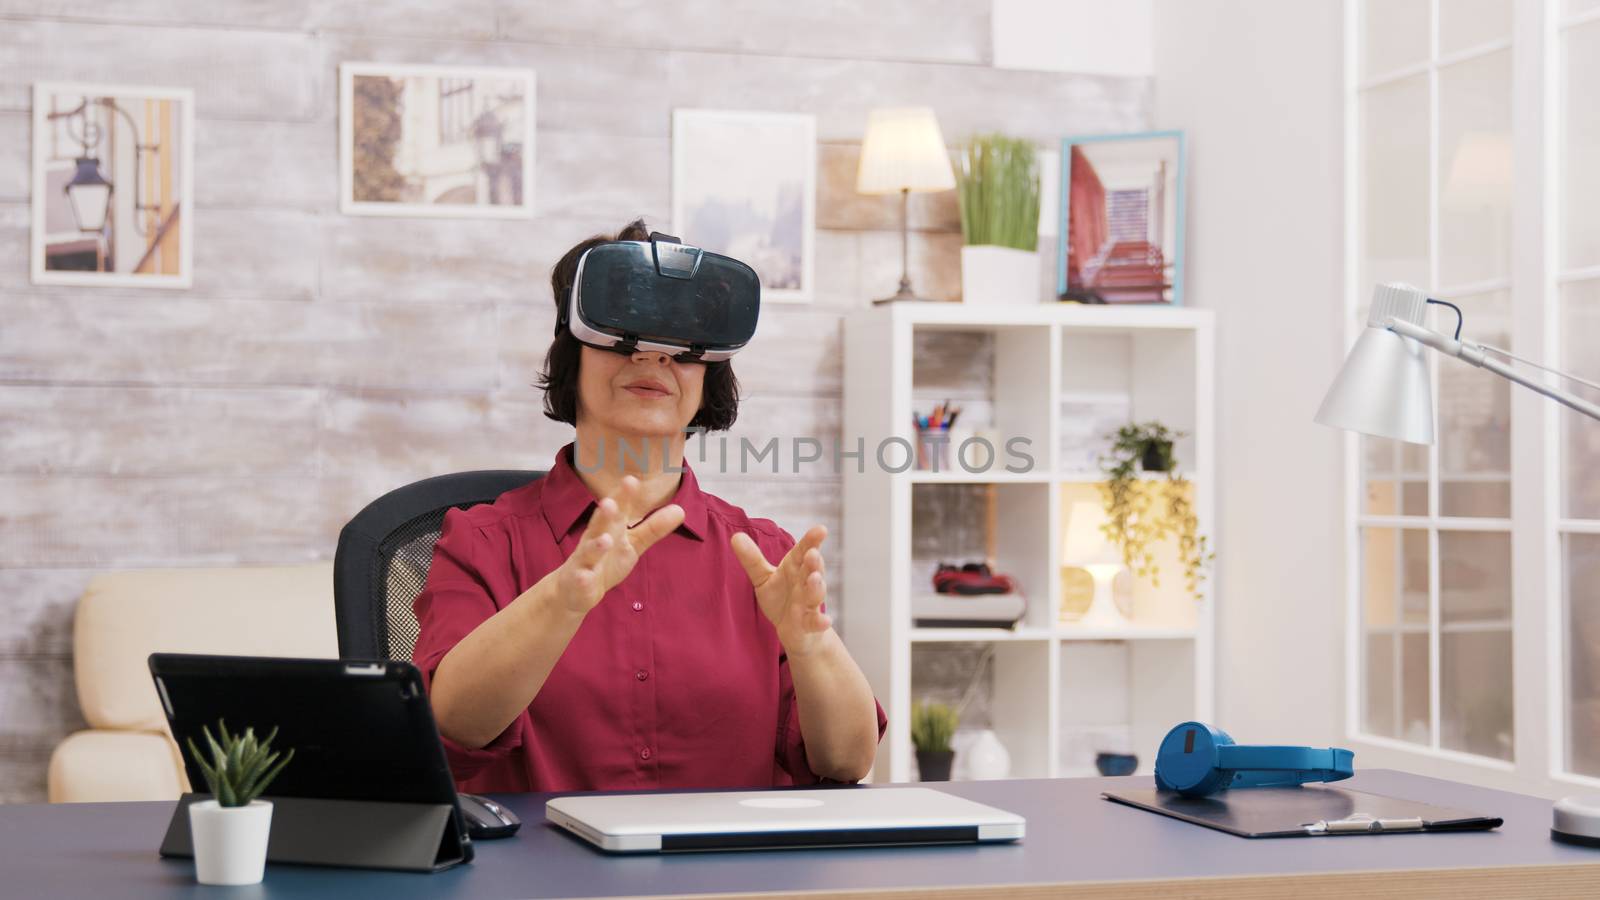 Elderly age woman using virtual reality goggles in living room by DCStudio